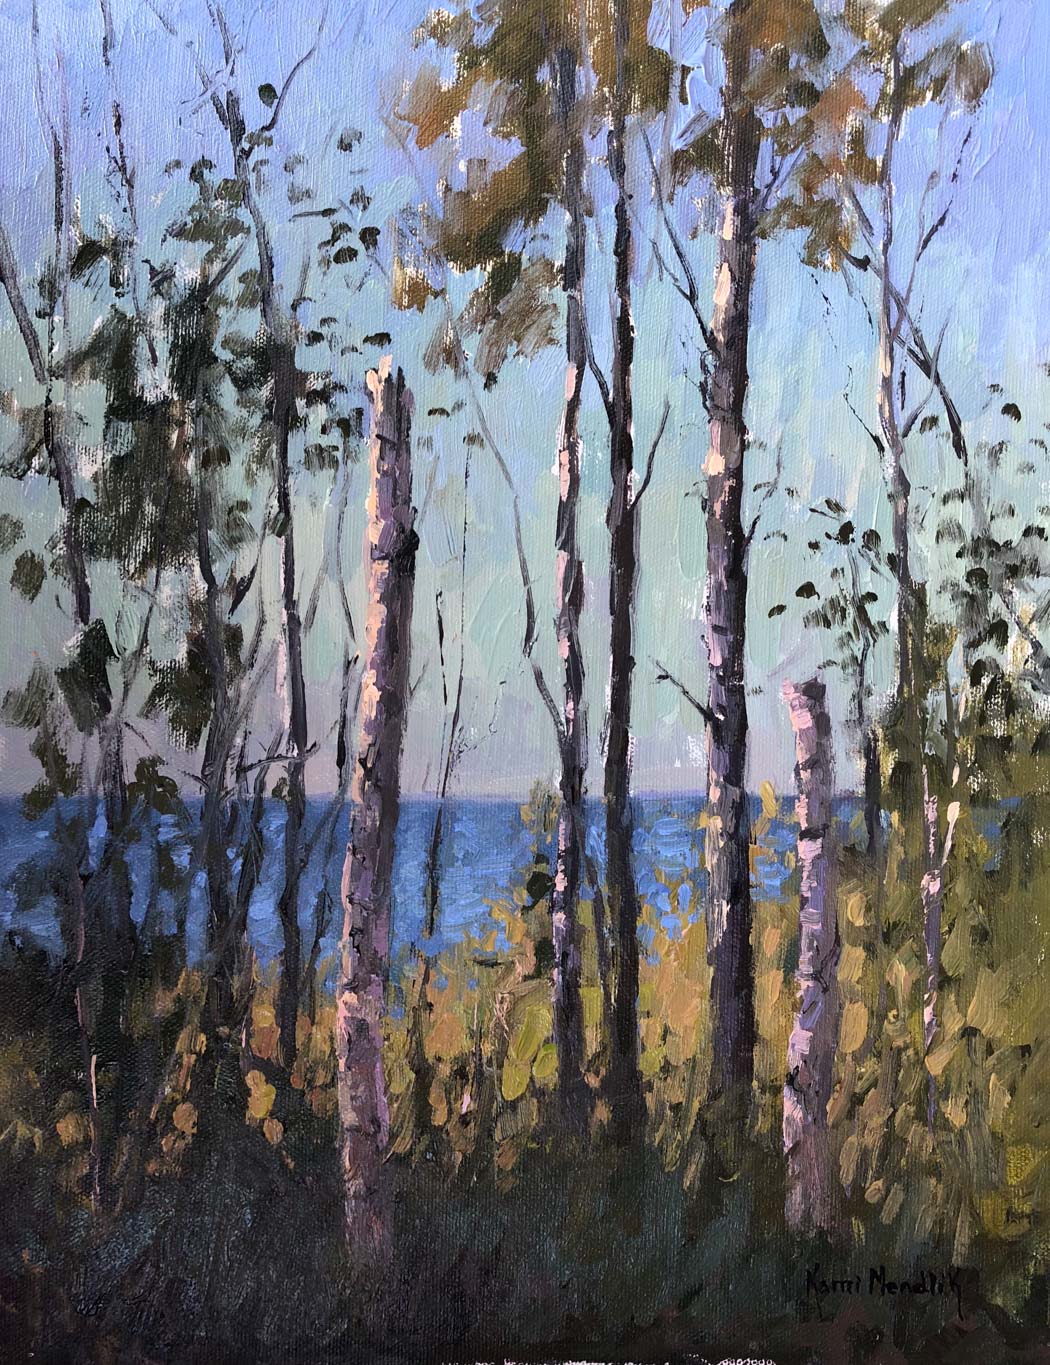 Canvas of some trees and plants next to the sea